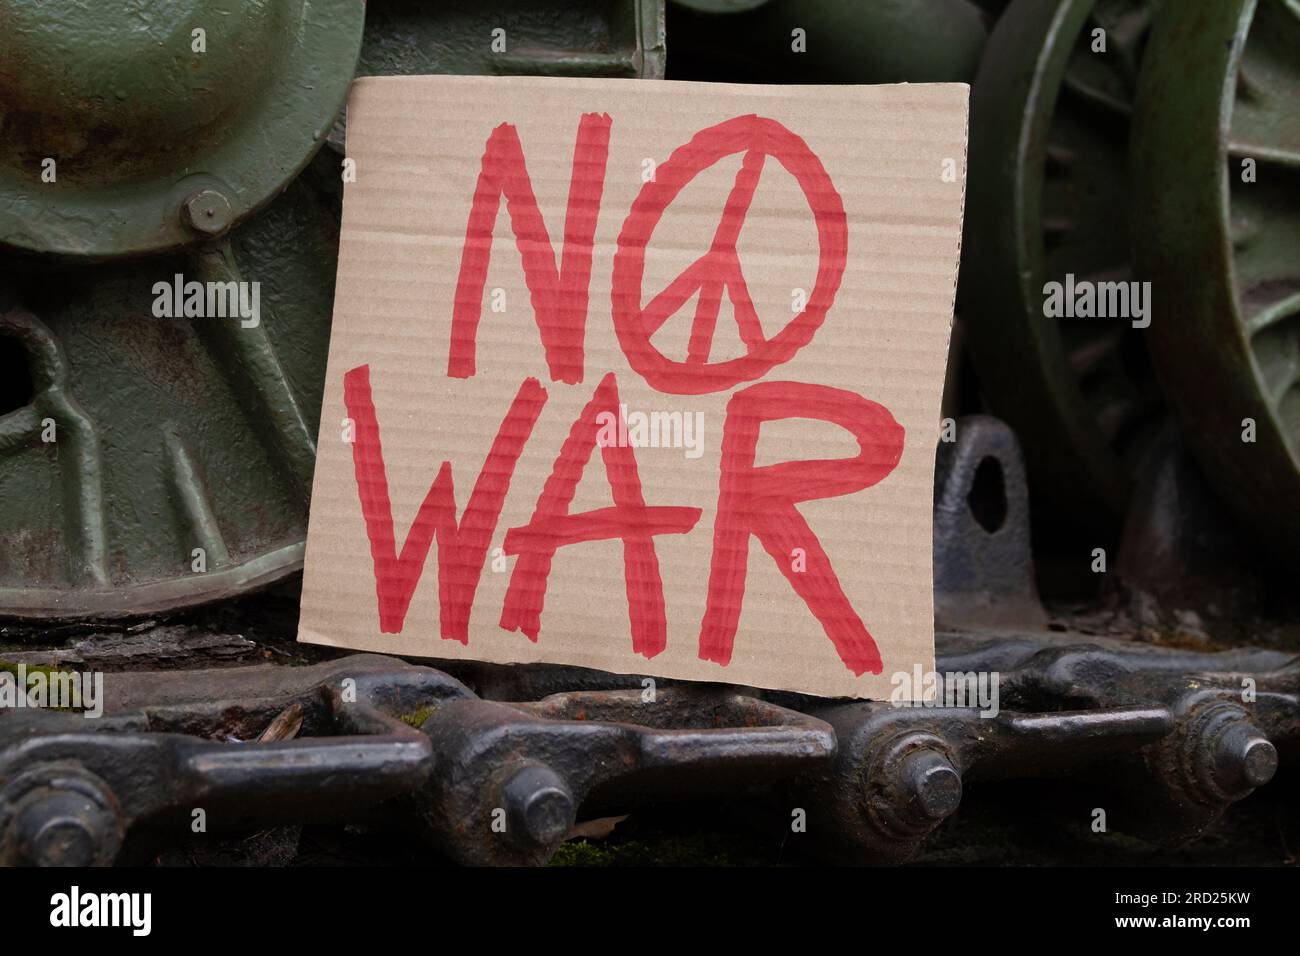 No War placard with peace sign on army tank caterpillar continuous